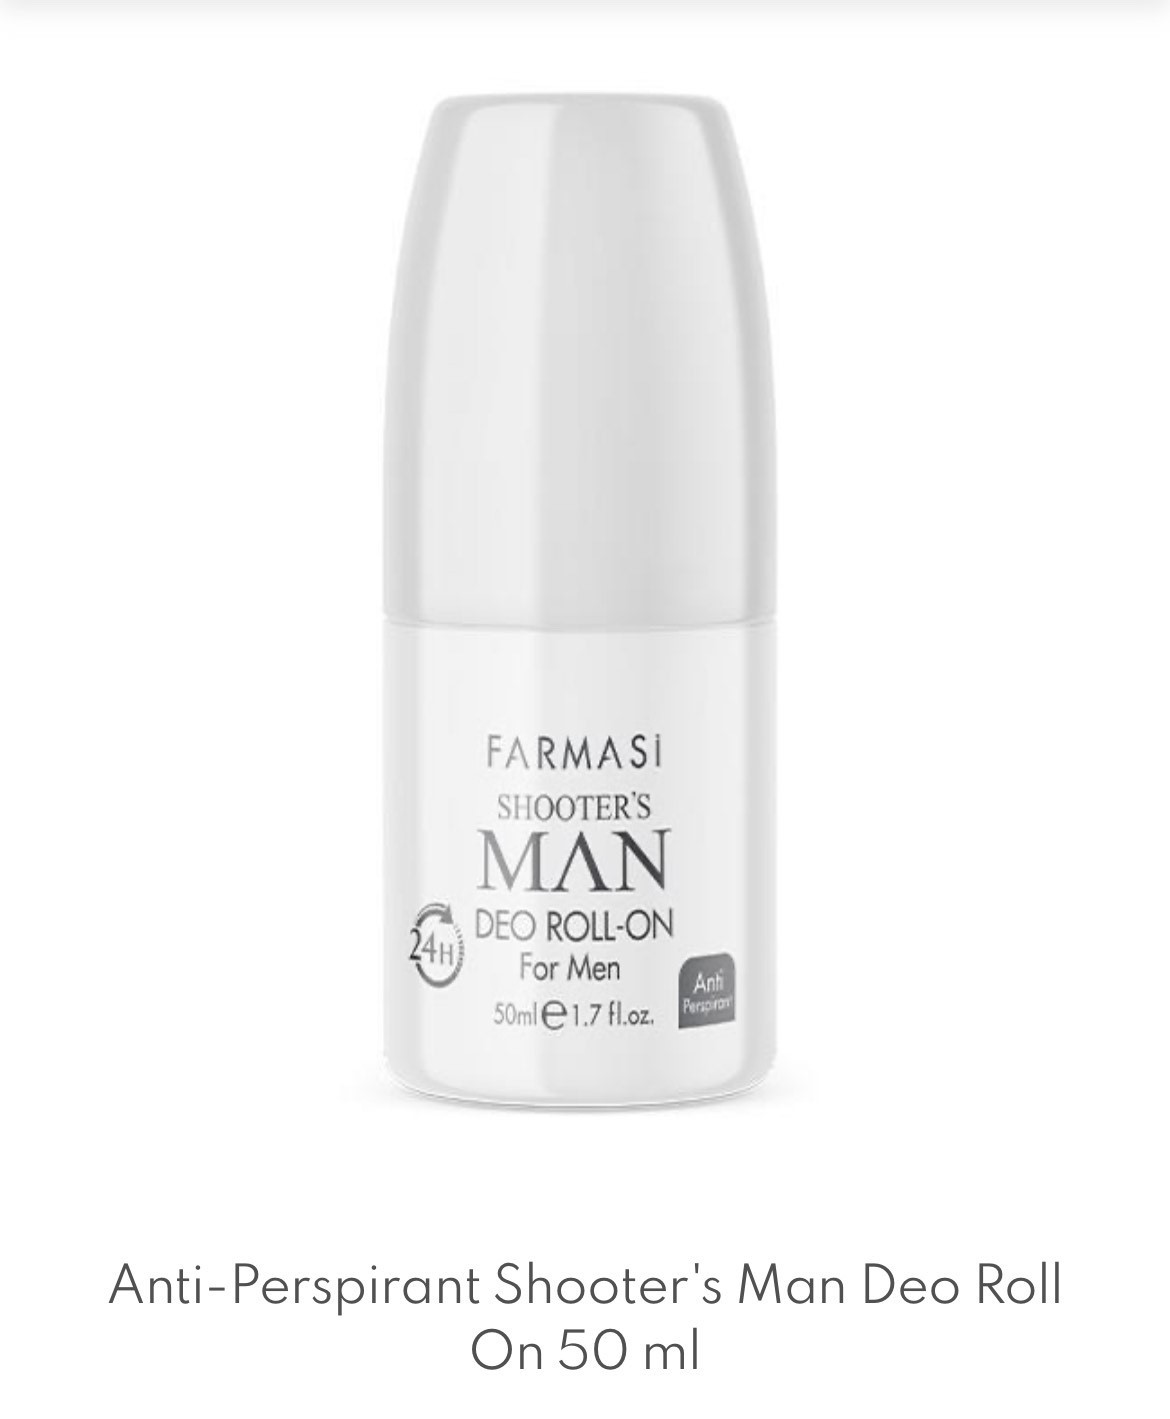 Anti-Perspirant Shooter's Man Deo Roll On 50 ml